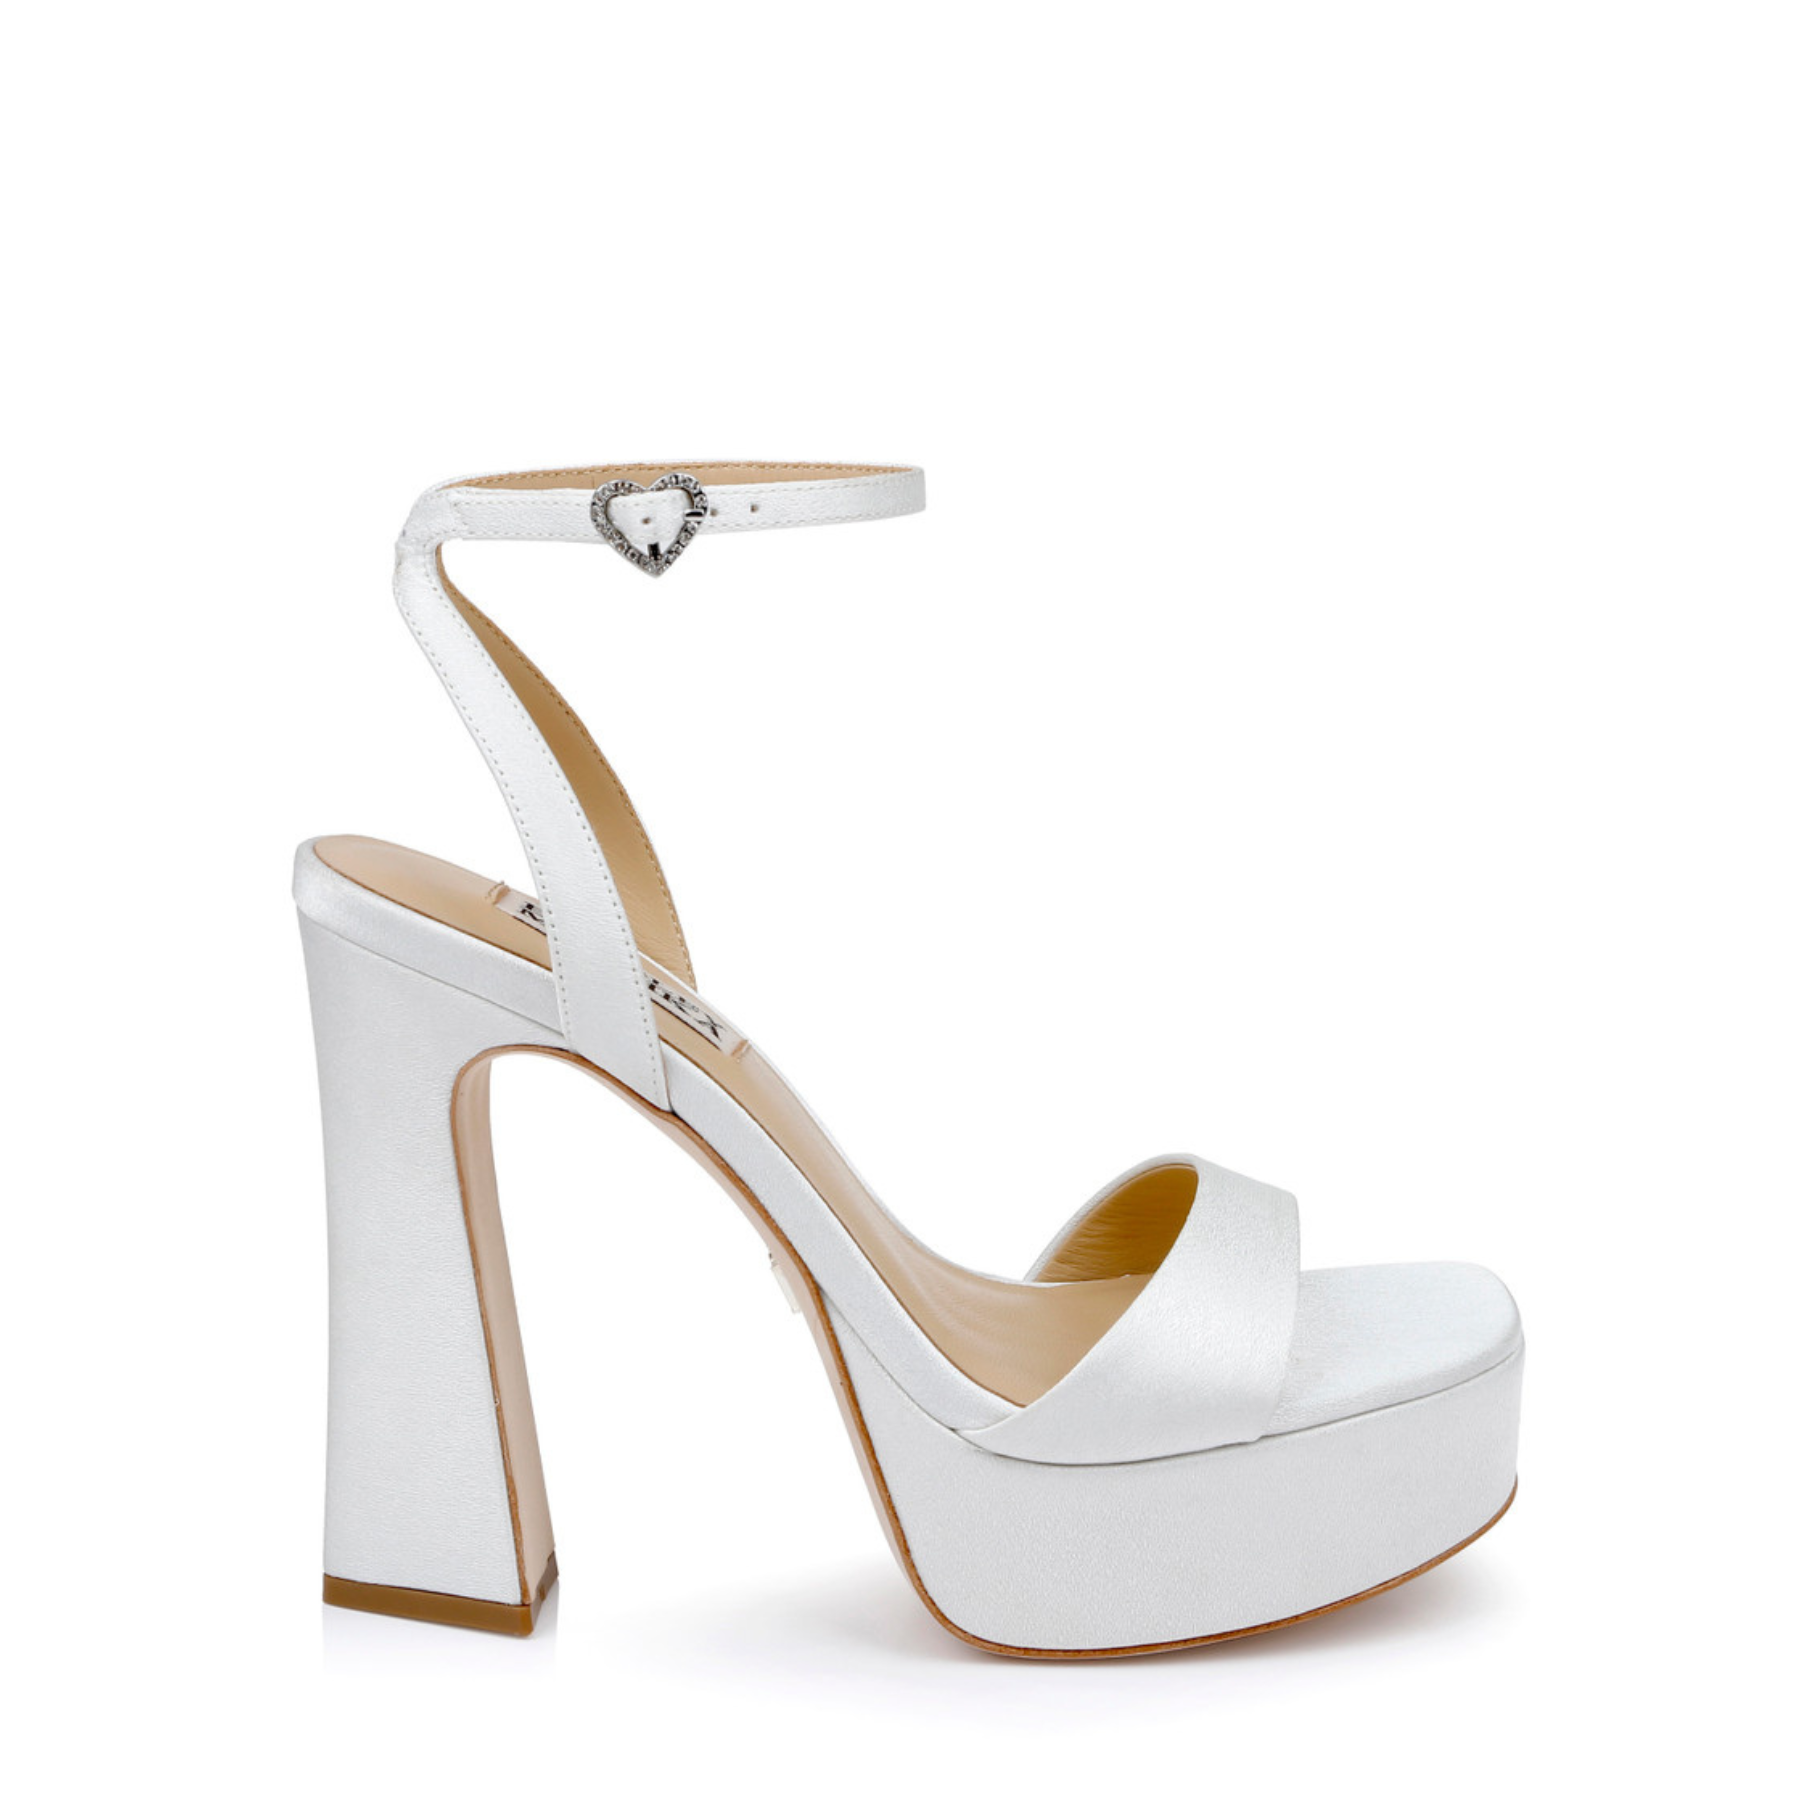 Badgley Mischka - Felixa - Closed Toe Platform Heel with Pearl Ankle Strap  - Soft White | The White Collection